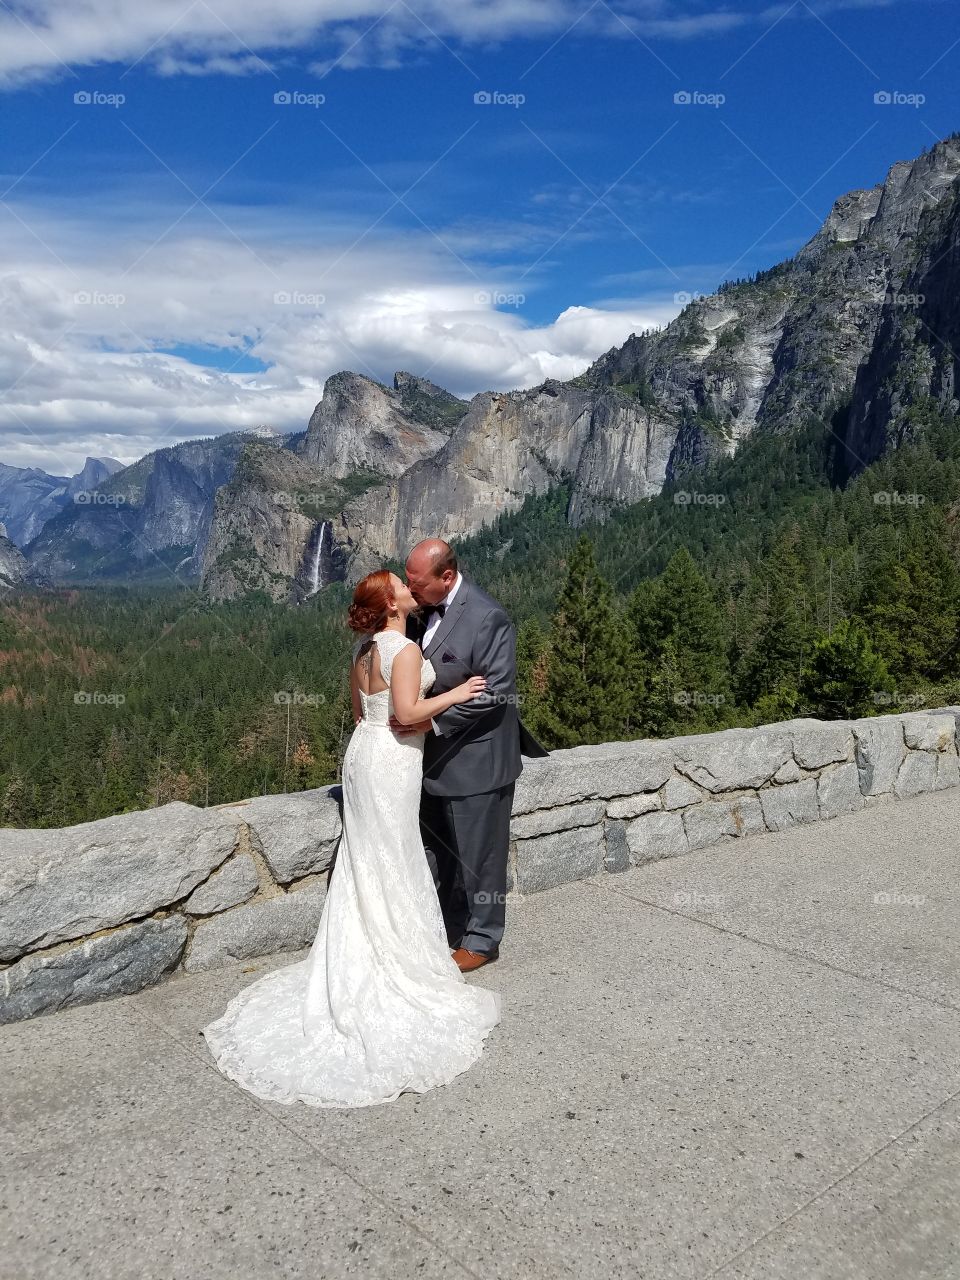 Just Married - Yosemite National Park, CA